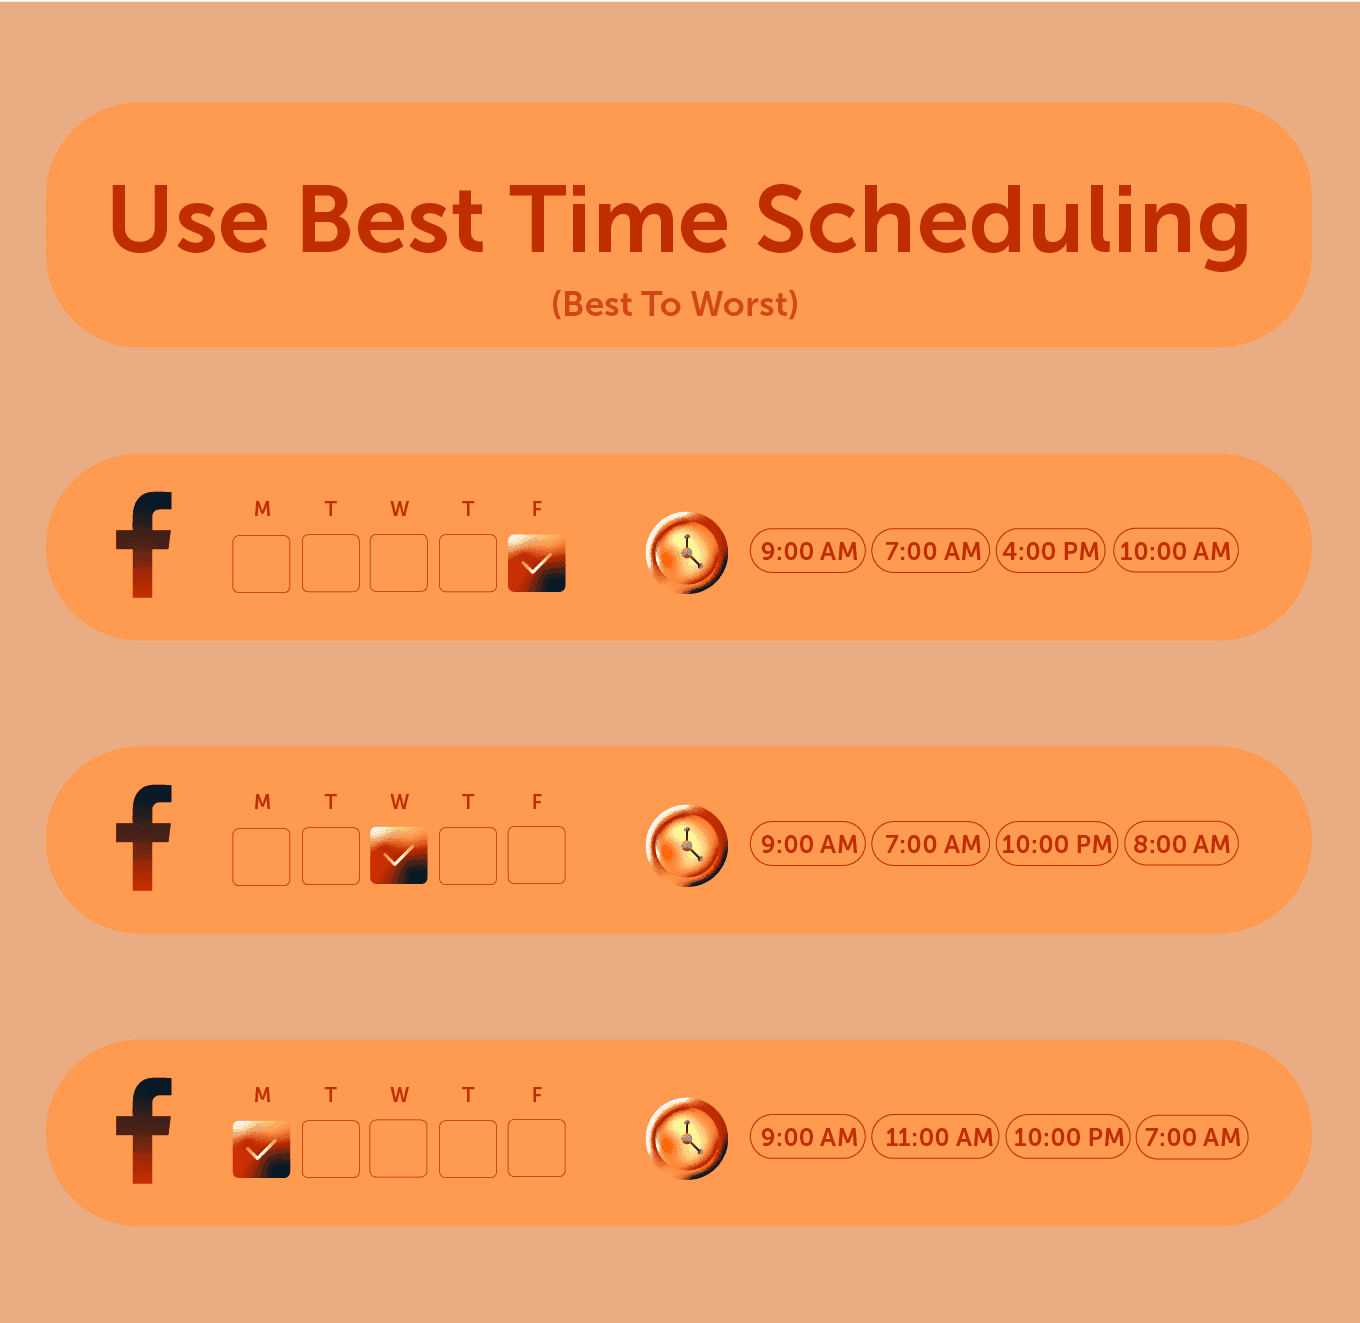 Use best time scheduling (best to worst) F: 9AM, 7AM, 4PM, 10AM. W: 9AM, 7AM, 10PM, 8AM. M: 9AM, 11AM, 10PM, 7AM